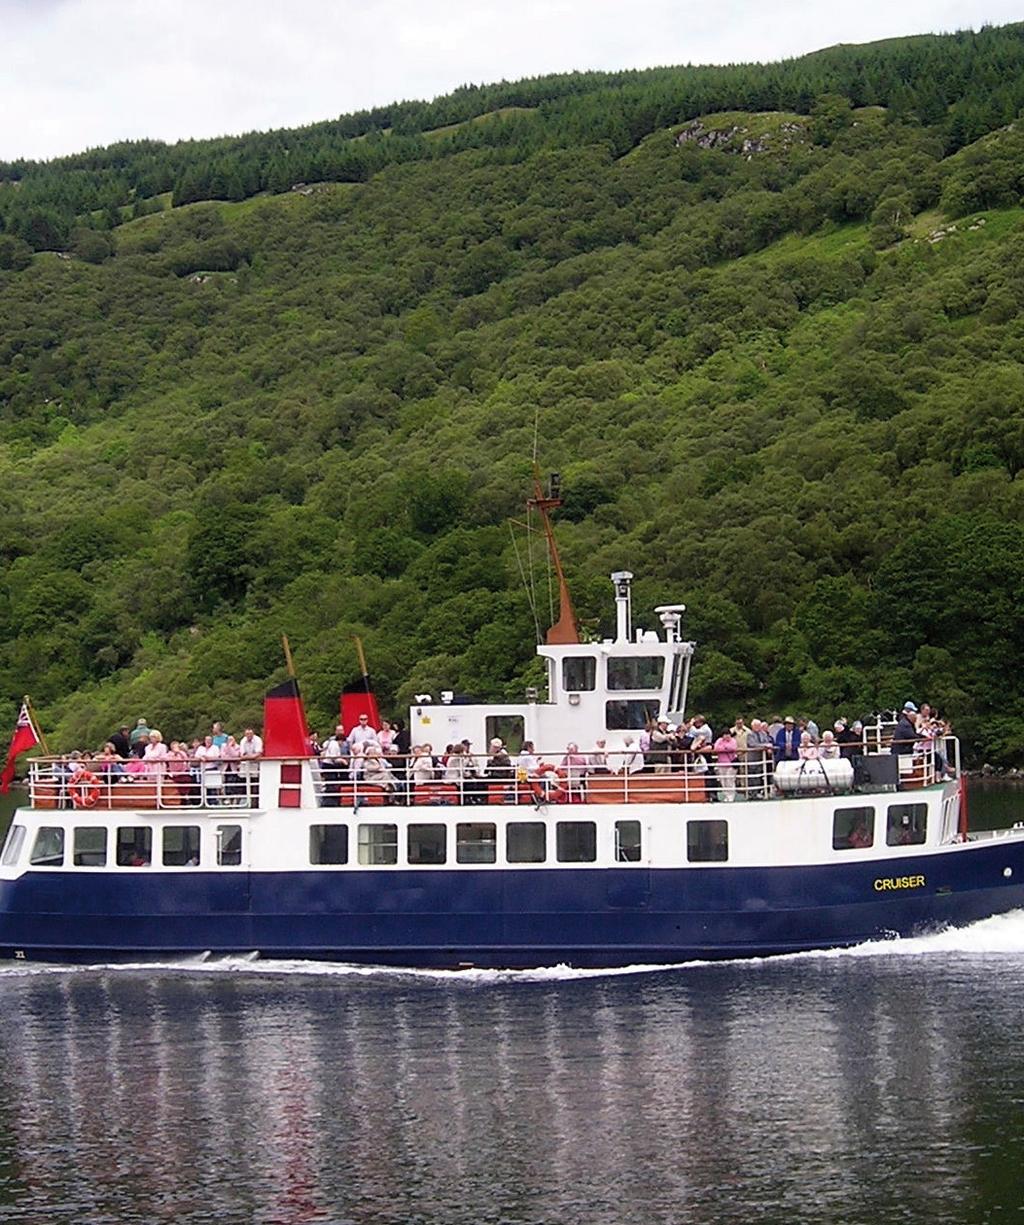 Dunoon & Greenock Cruises With departure points in Greenock and Dunoon this is an ideal cruise to explore the pretty Sea Lochs and inlets on the stunning West